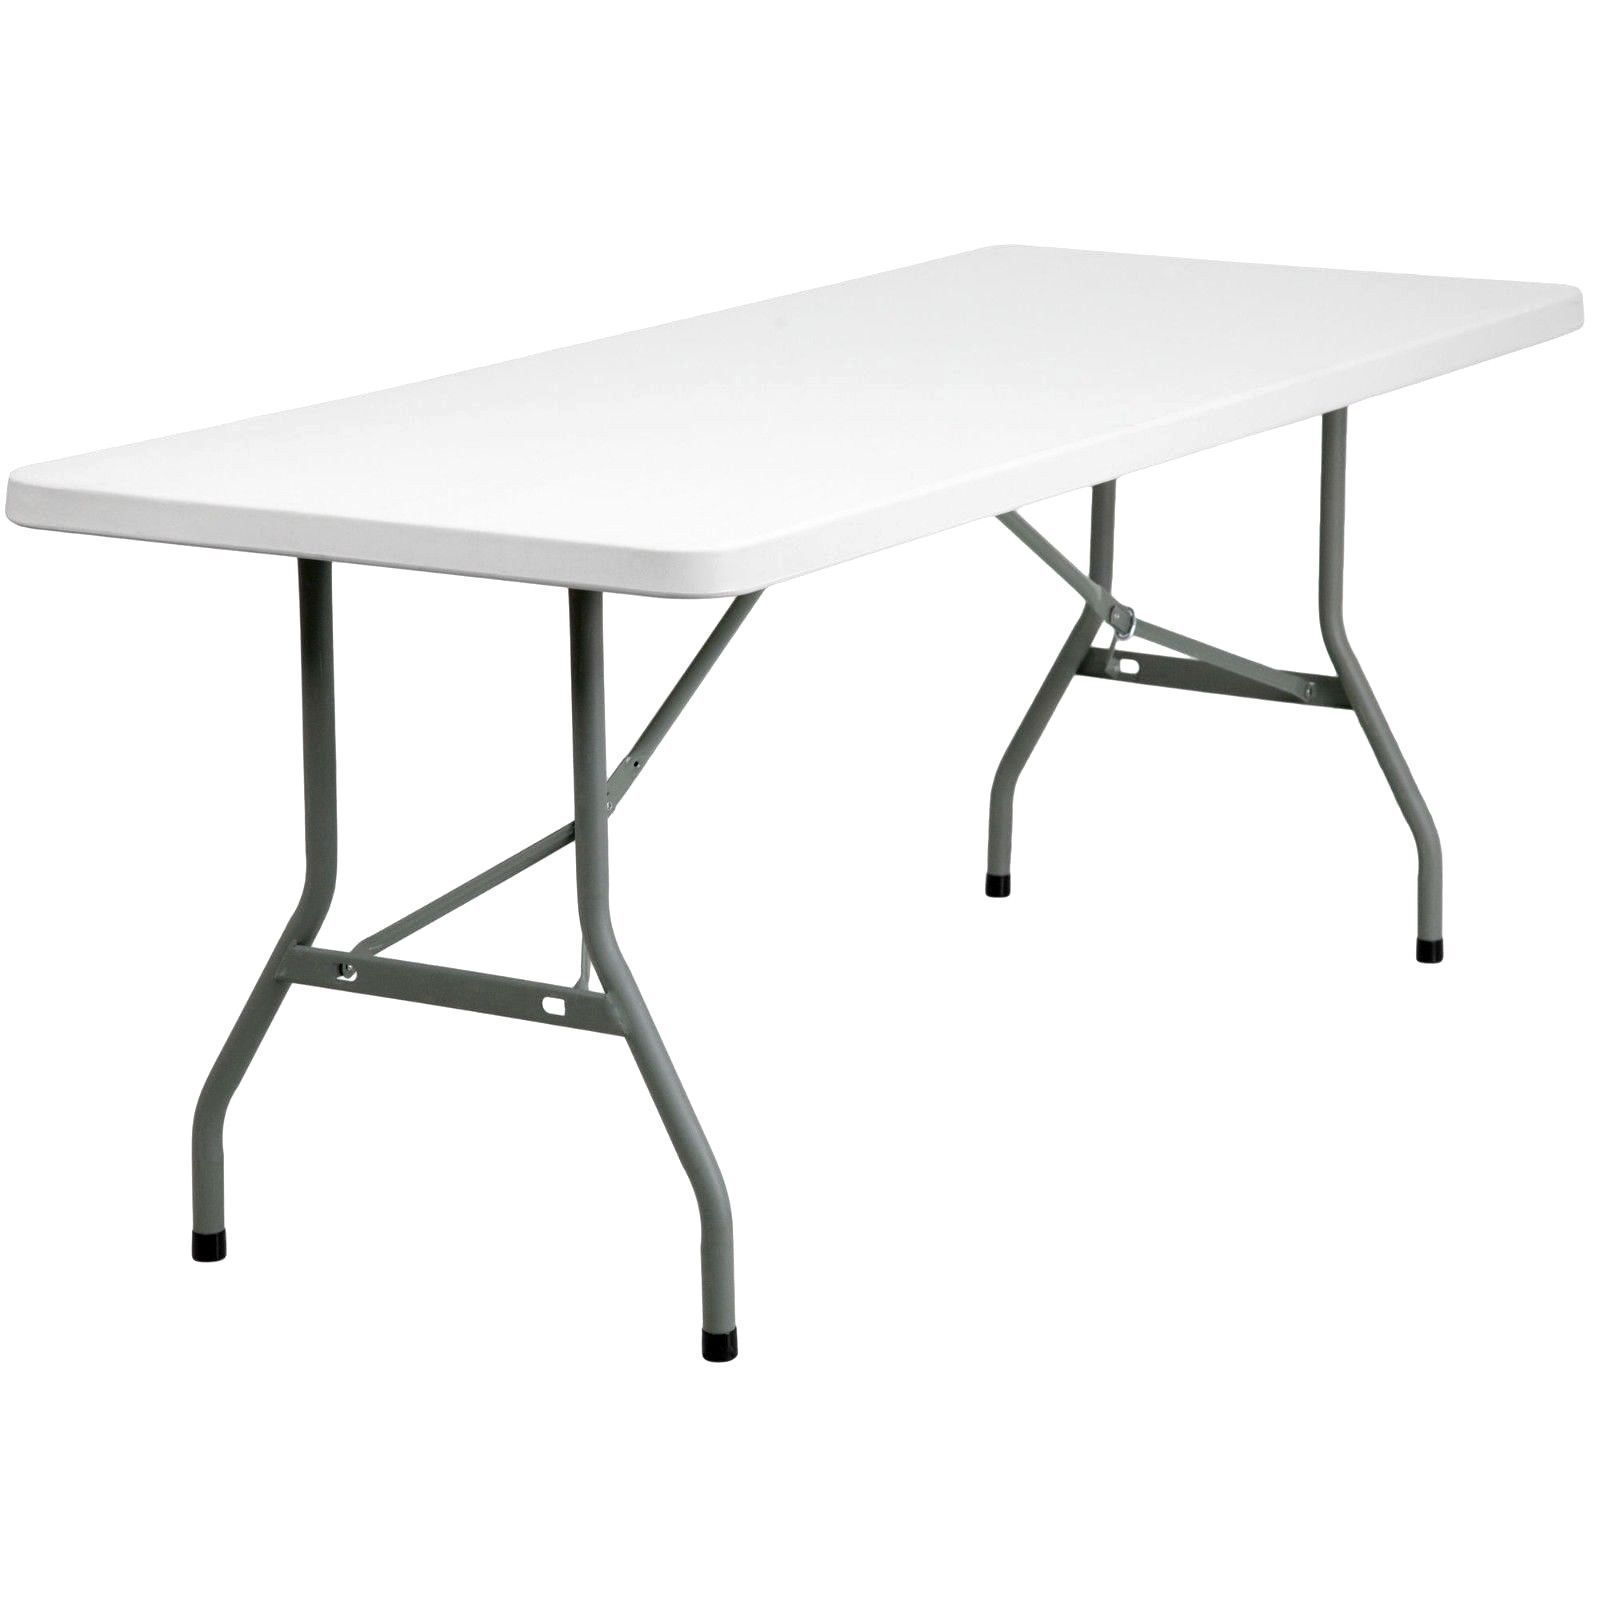 30" x 72" Heavy Duty Folding Plastic Granite White Table Commercial Banquet 6' - $198.26